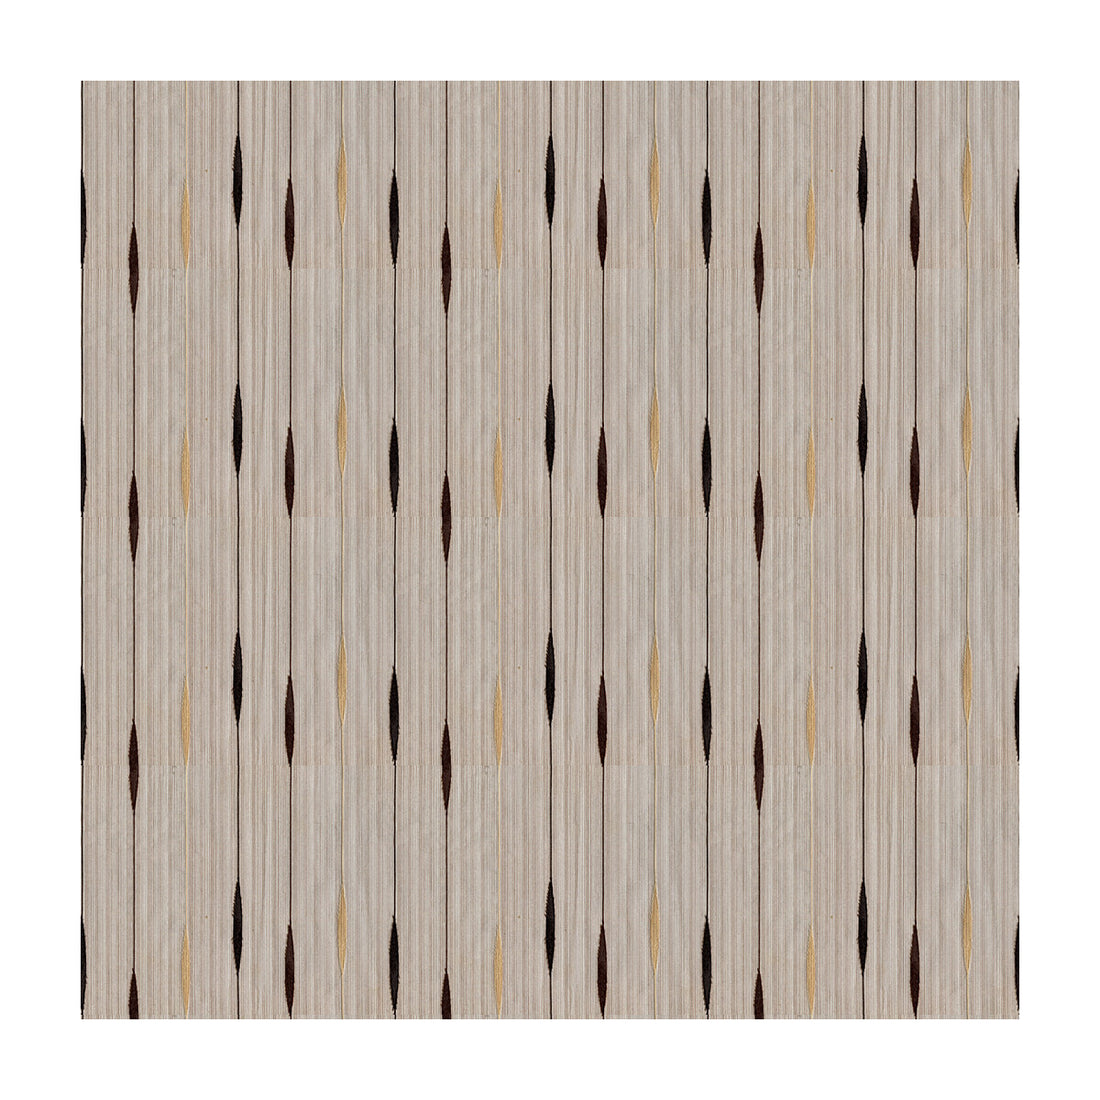 Kravet Contract fabric in 4160-616 color - pattern 4160.616.0 - by Kravet Contract